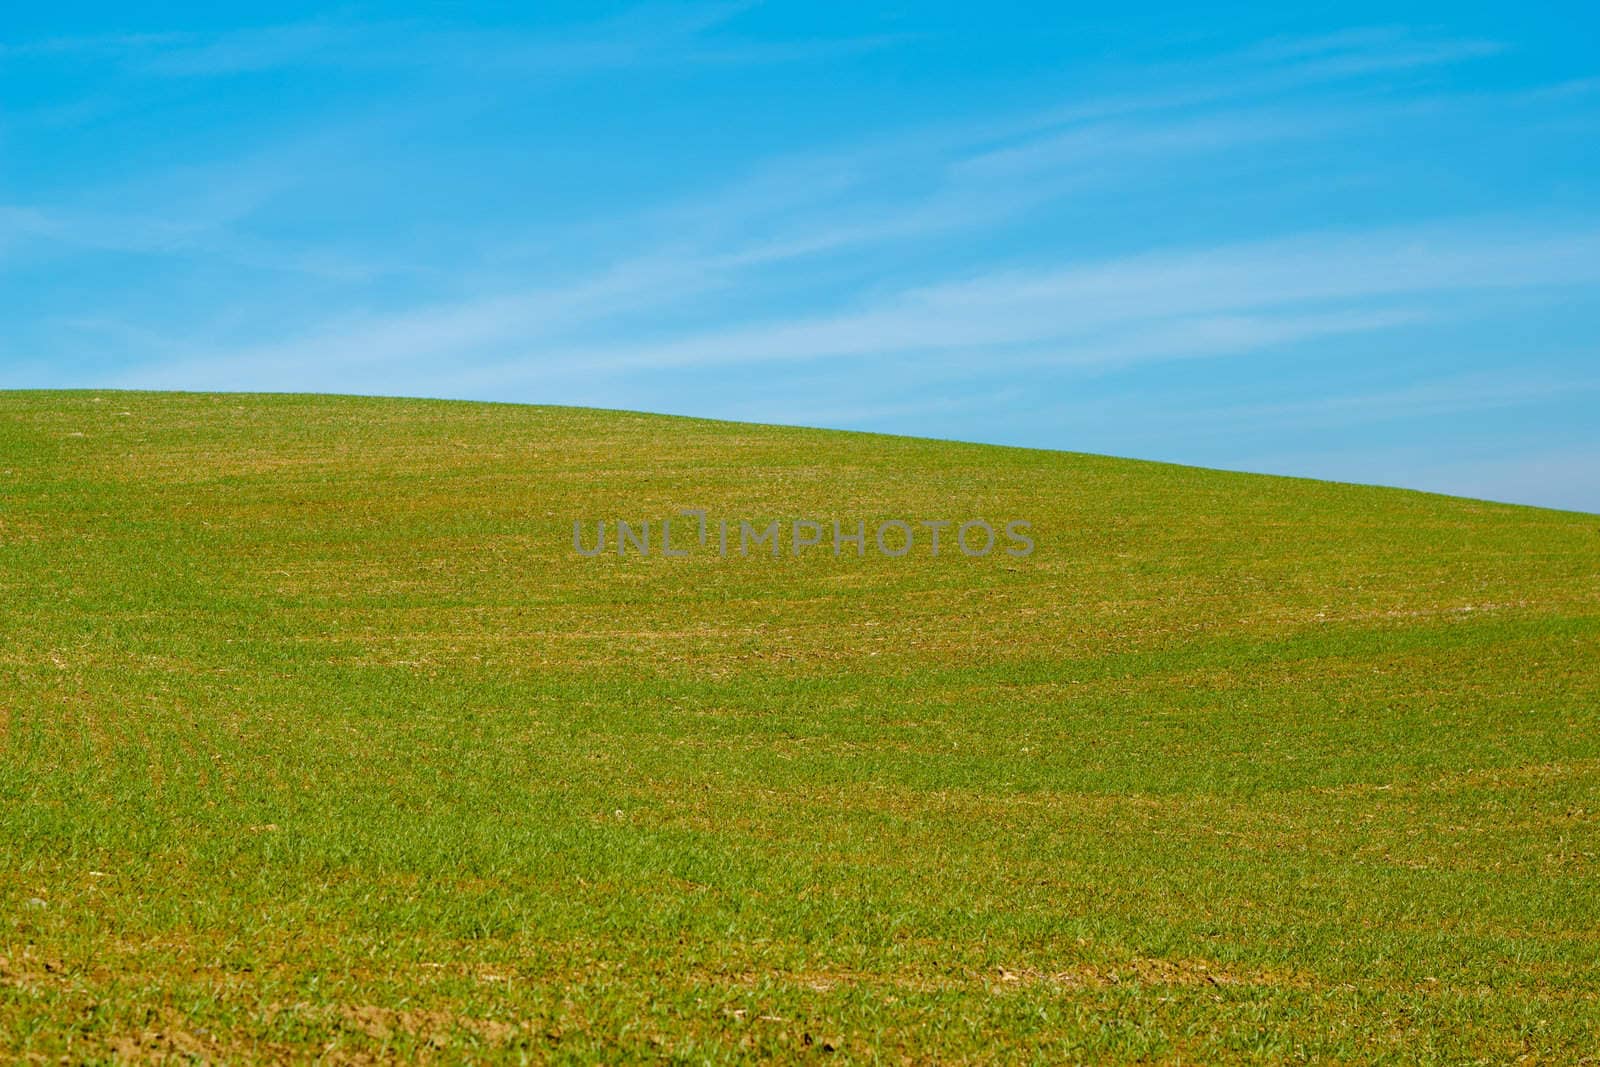 Nice autumn field with clear horizont and blue sky